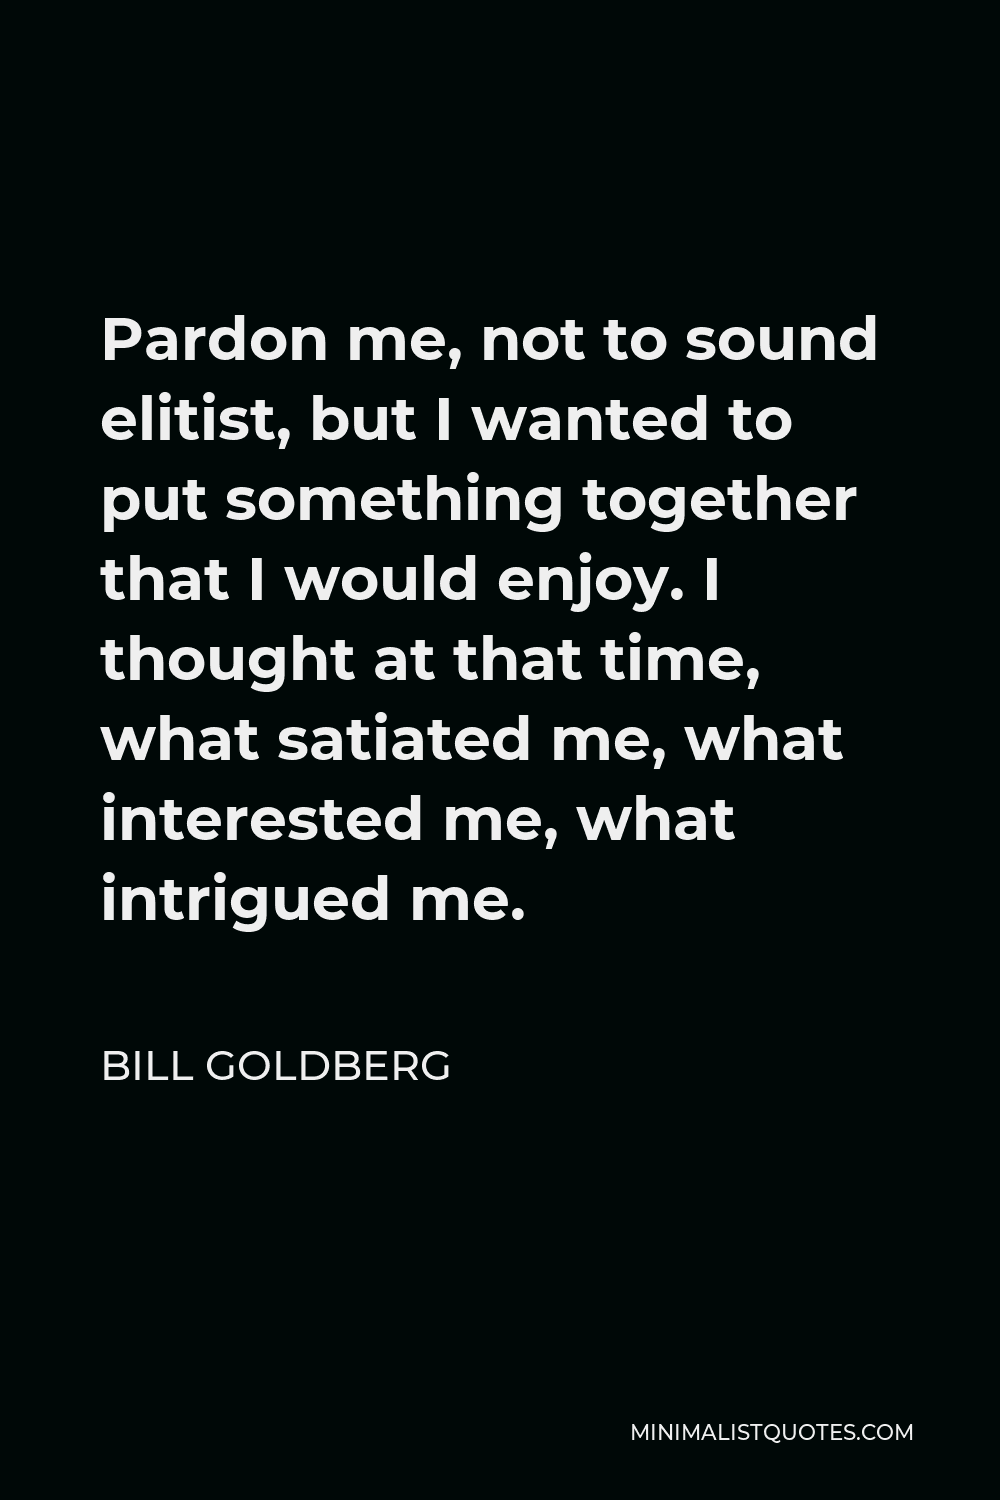 Bill Goldberg Quote - Pardon me, not to sound elitist, but I wanted to put something together that I would enjoy. I thought at that time, what satiated me, what interested me, what intrigued me.